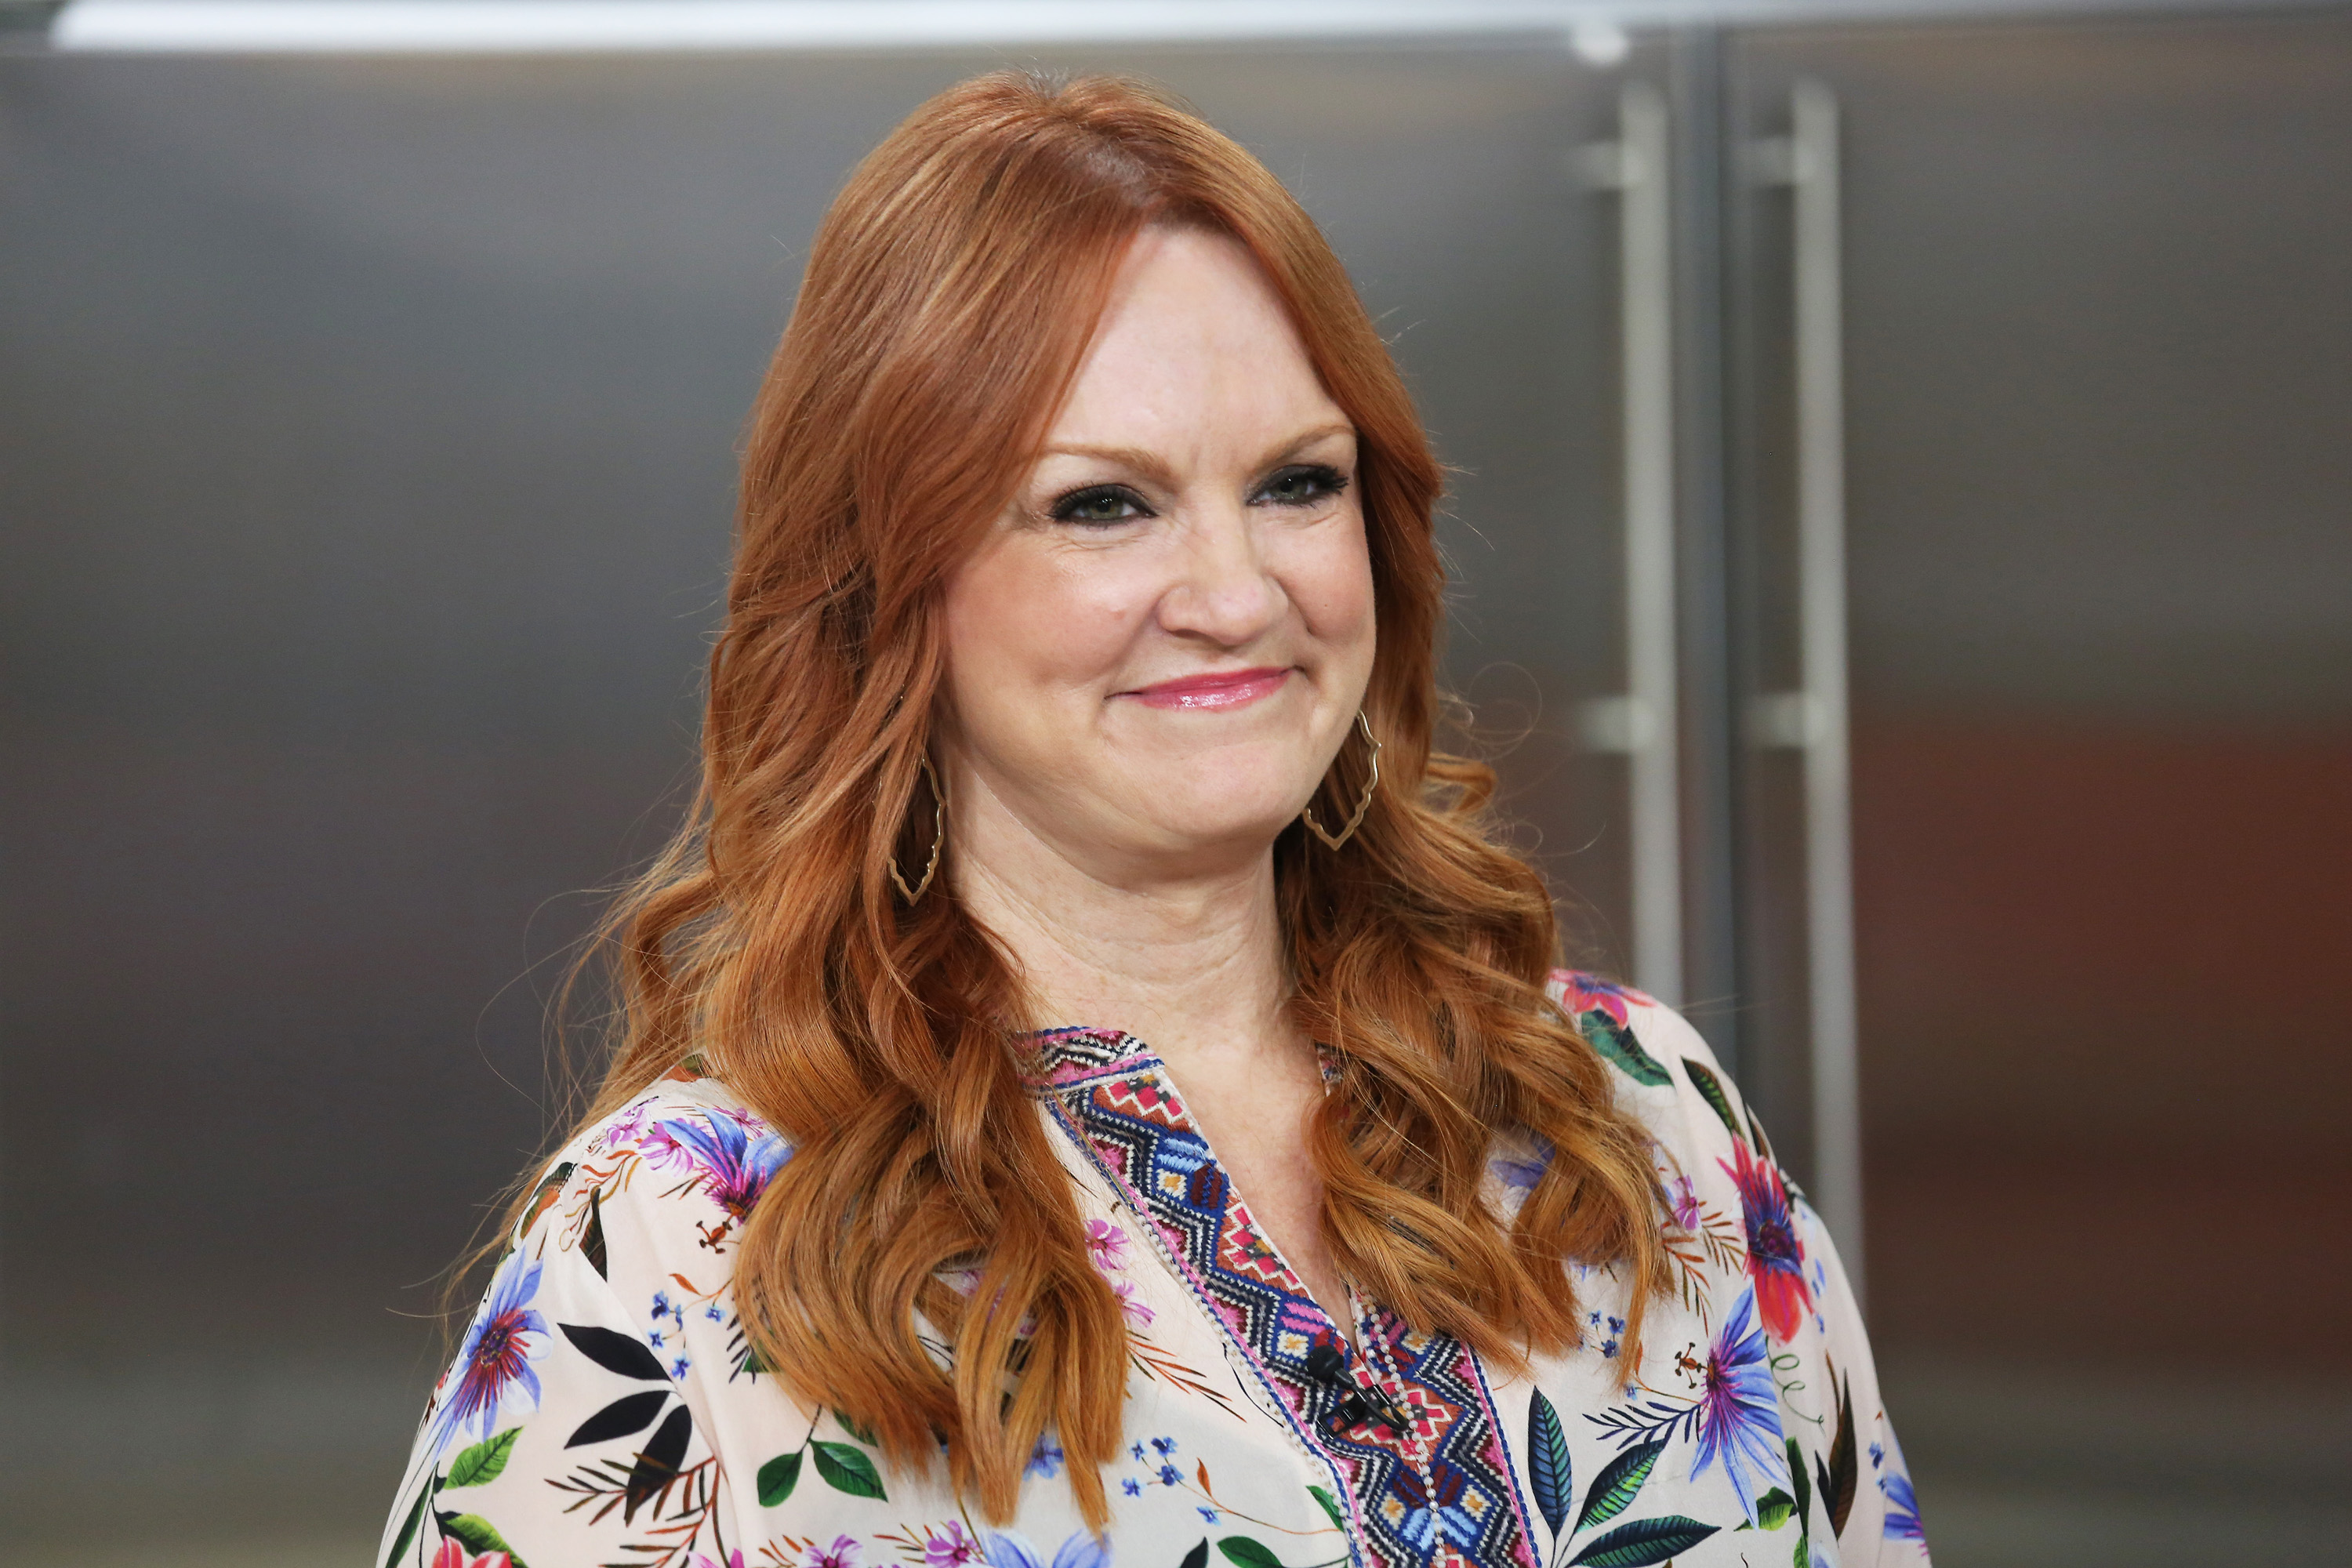 Ree Drummond smiles and wears a flower pattern blouse on the 'Today' show